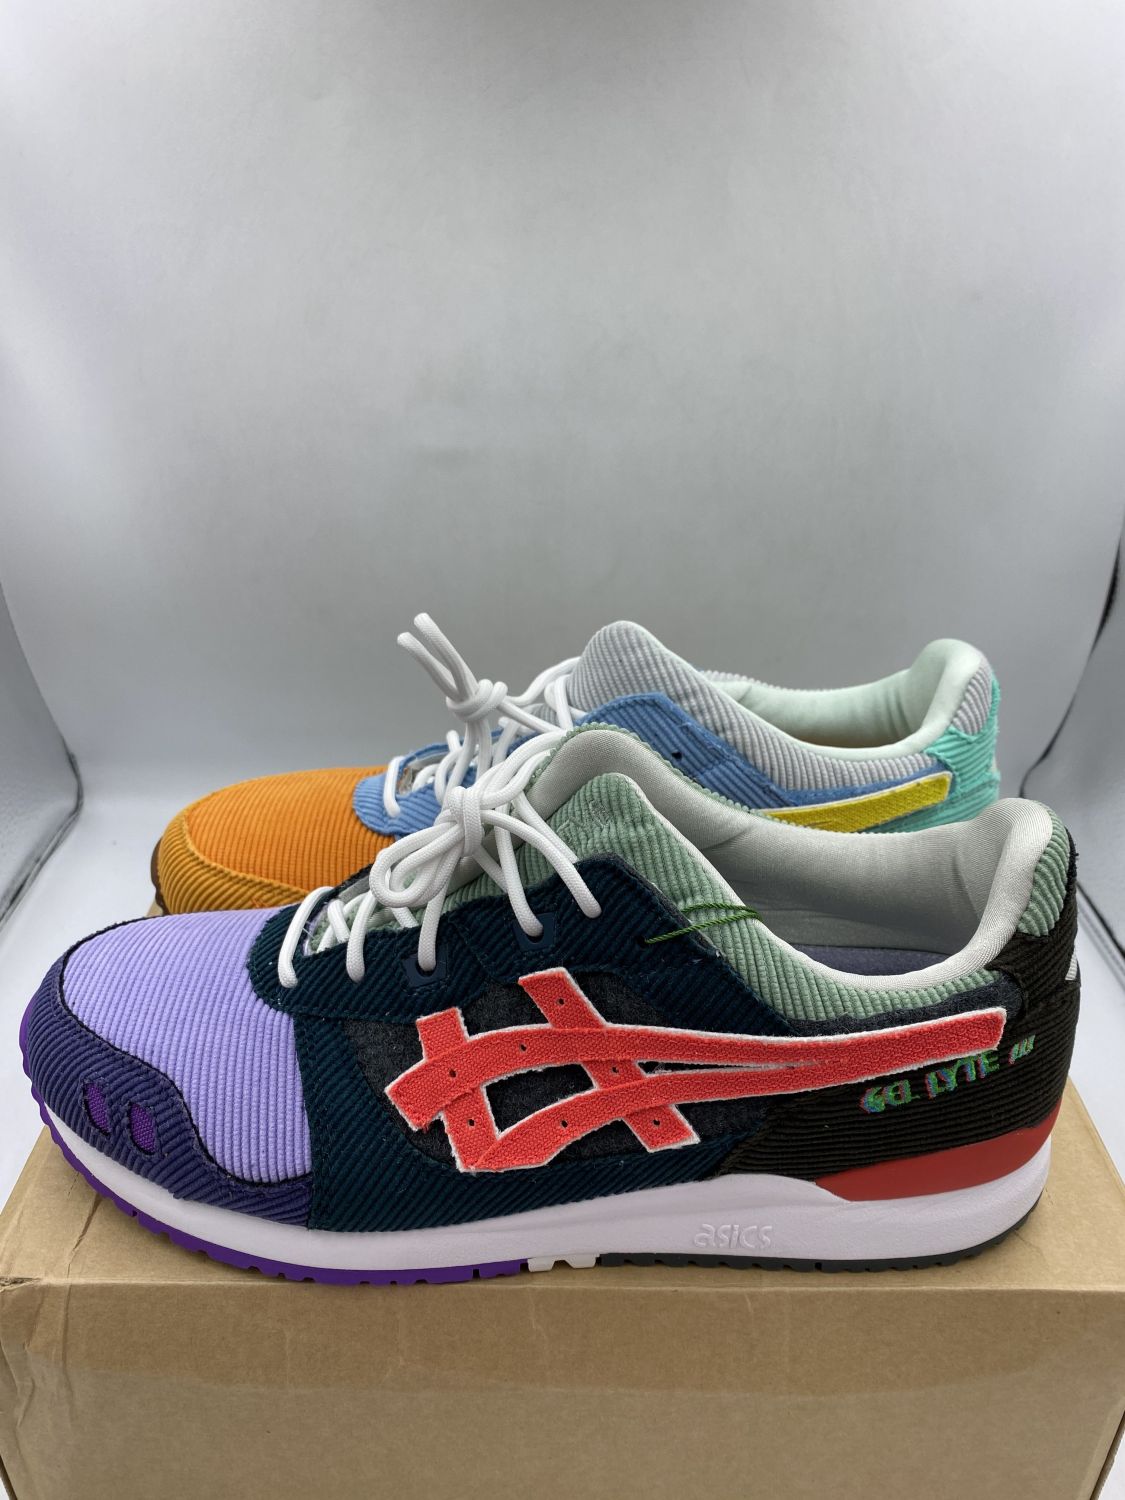 ASICS Gel- Lyte III Sean Wotherspoon X Atmos | AfterMarket